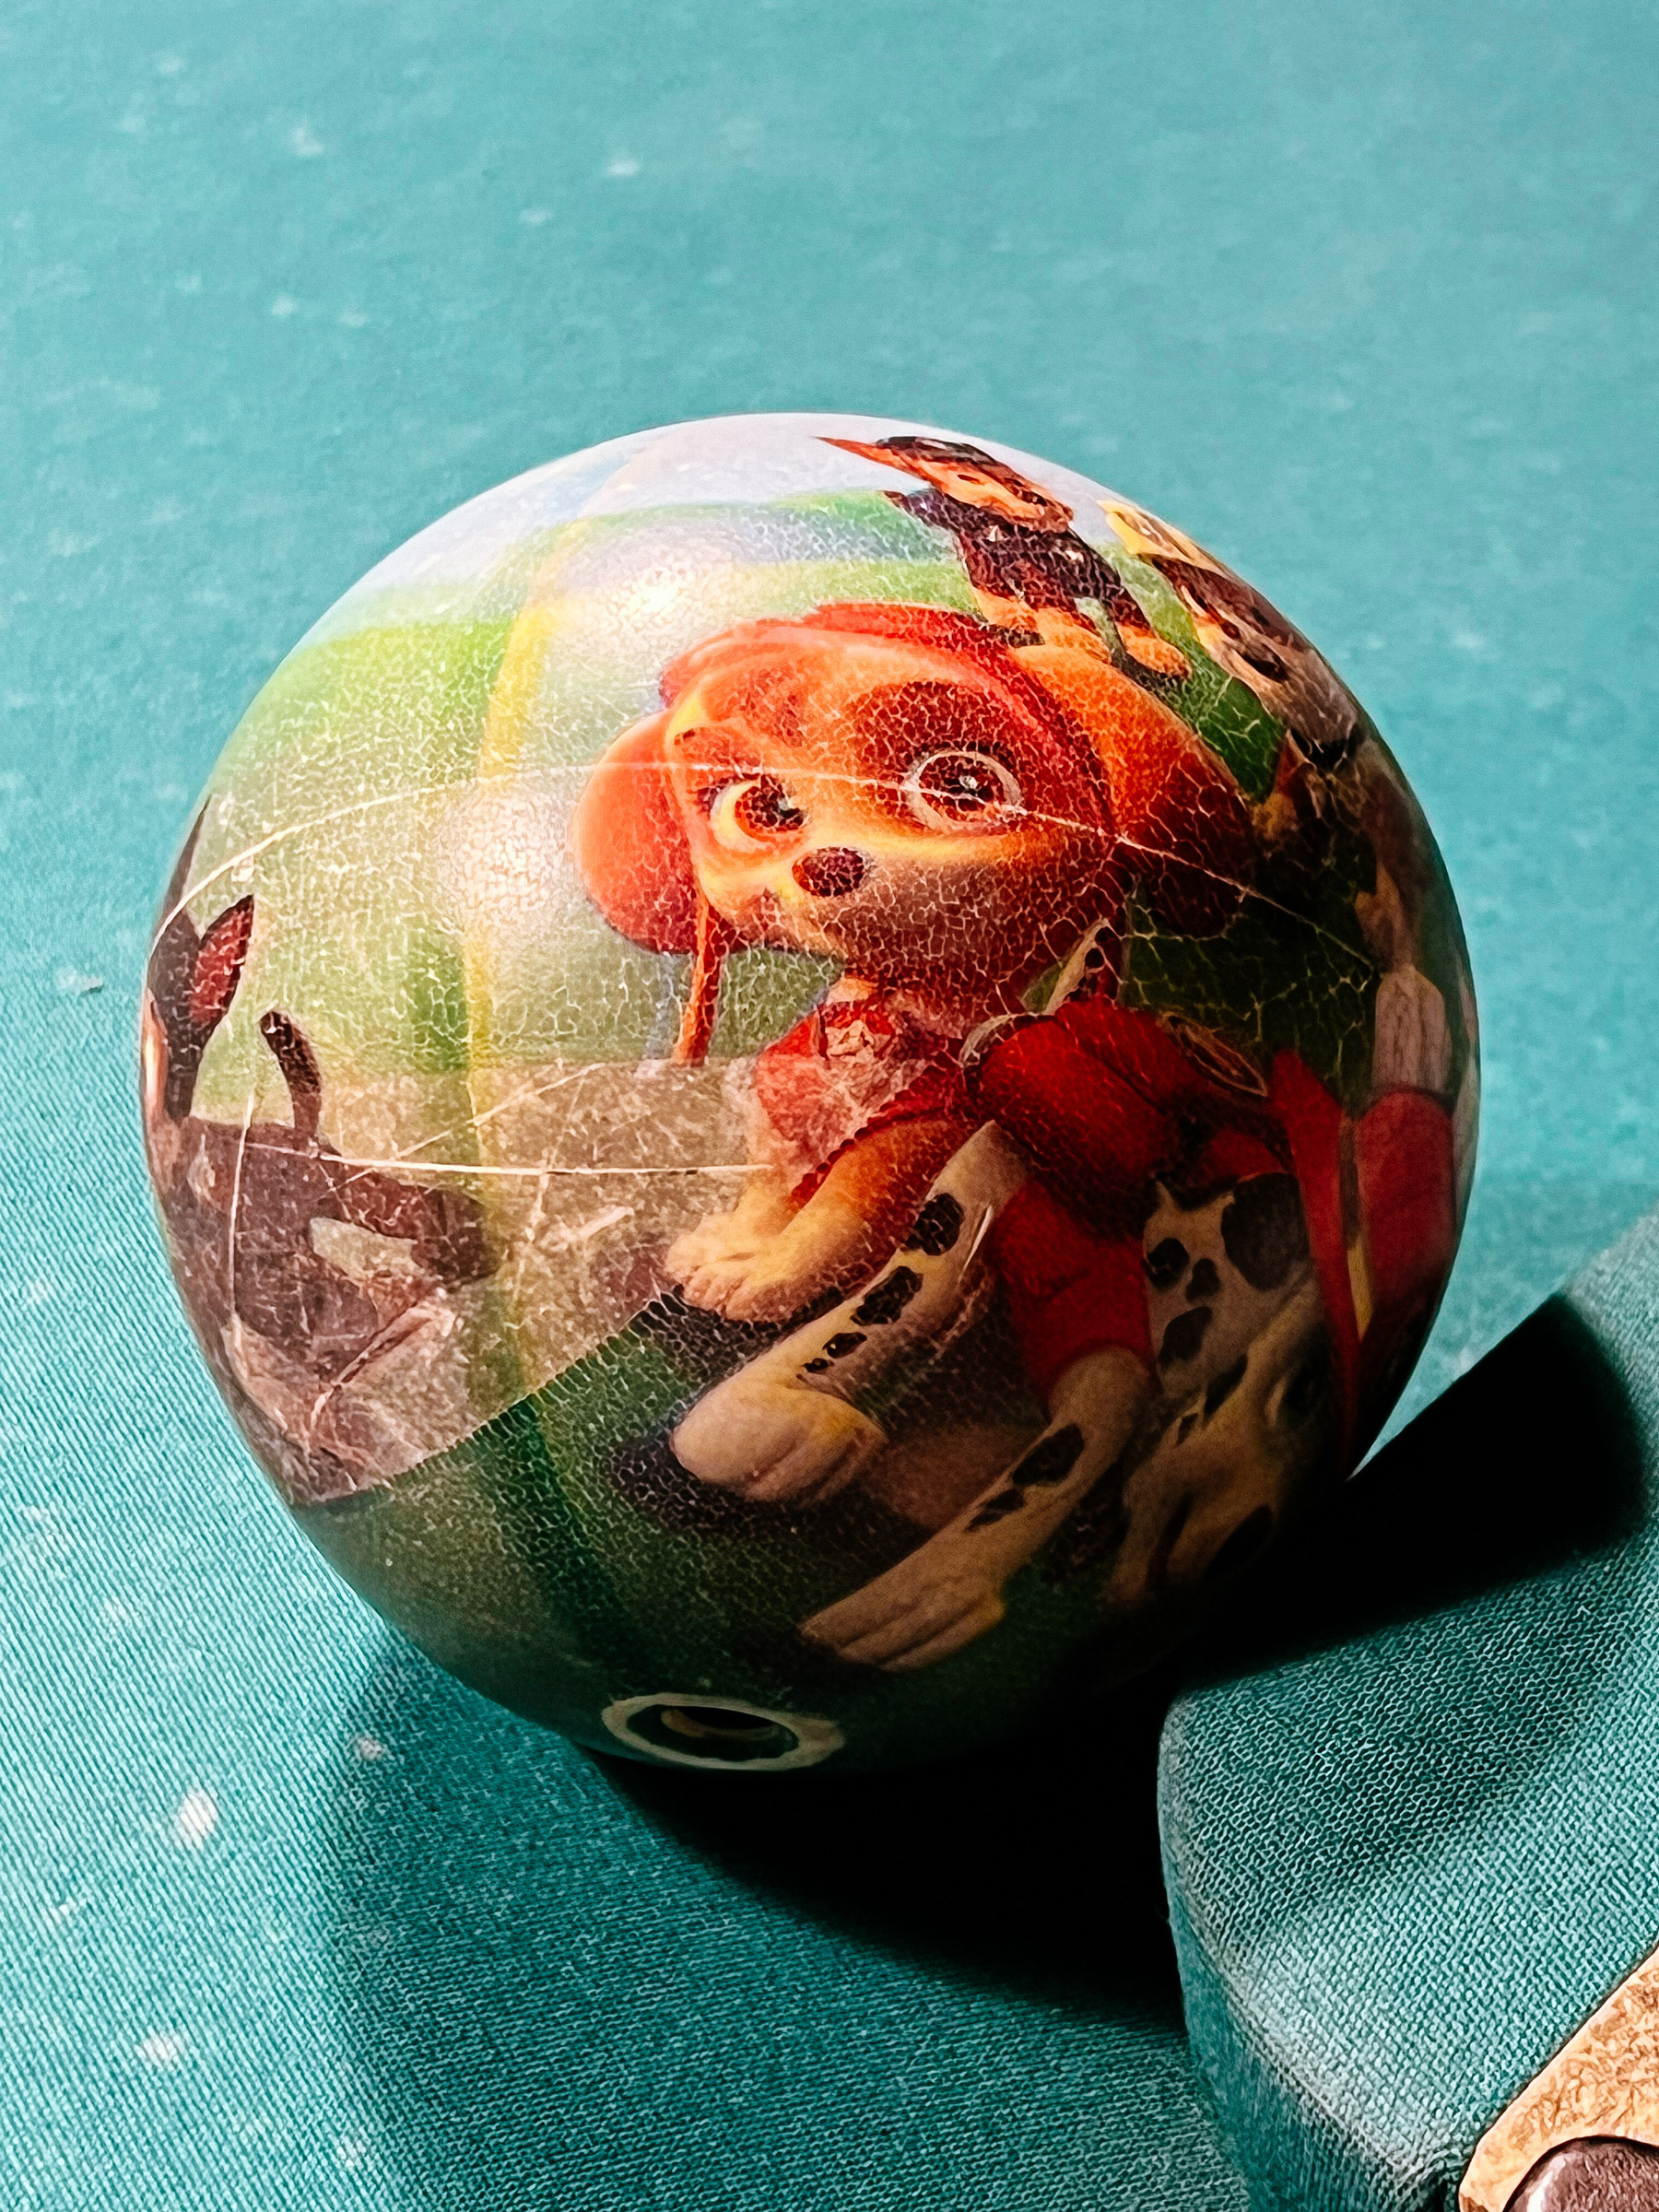 A ball with Skye from the Paw Patrol on a pool table. 